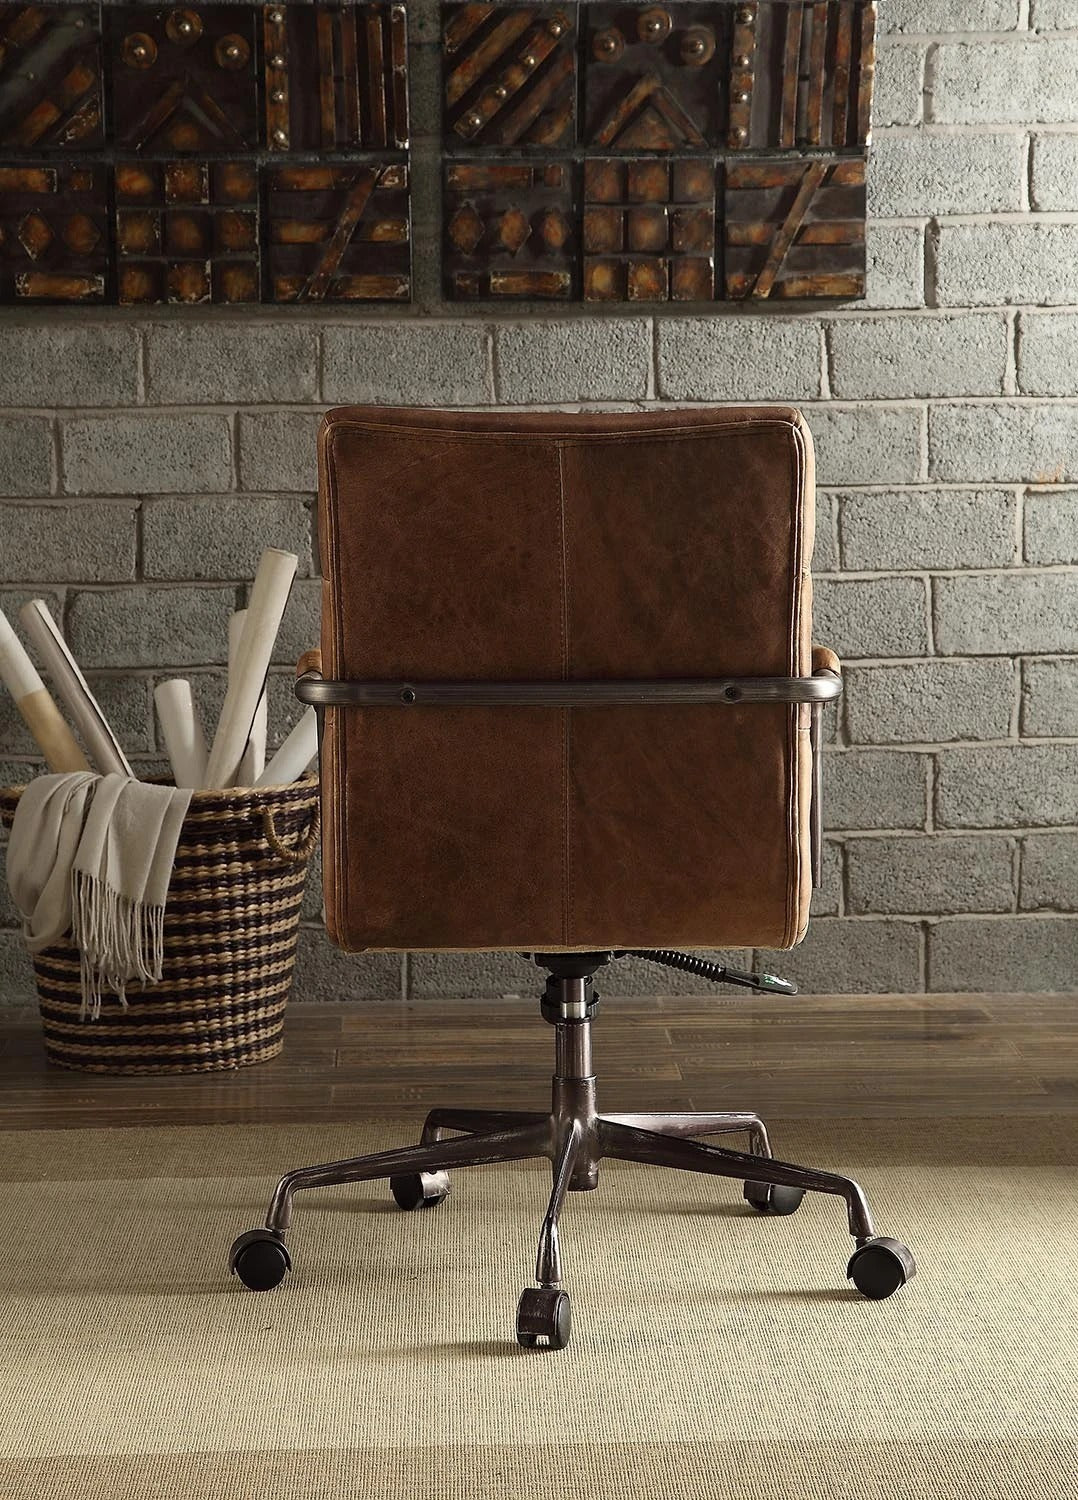 ACME Harith Office Chair in Retro Brown Top Grain Leather